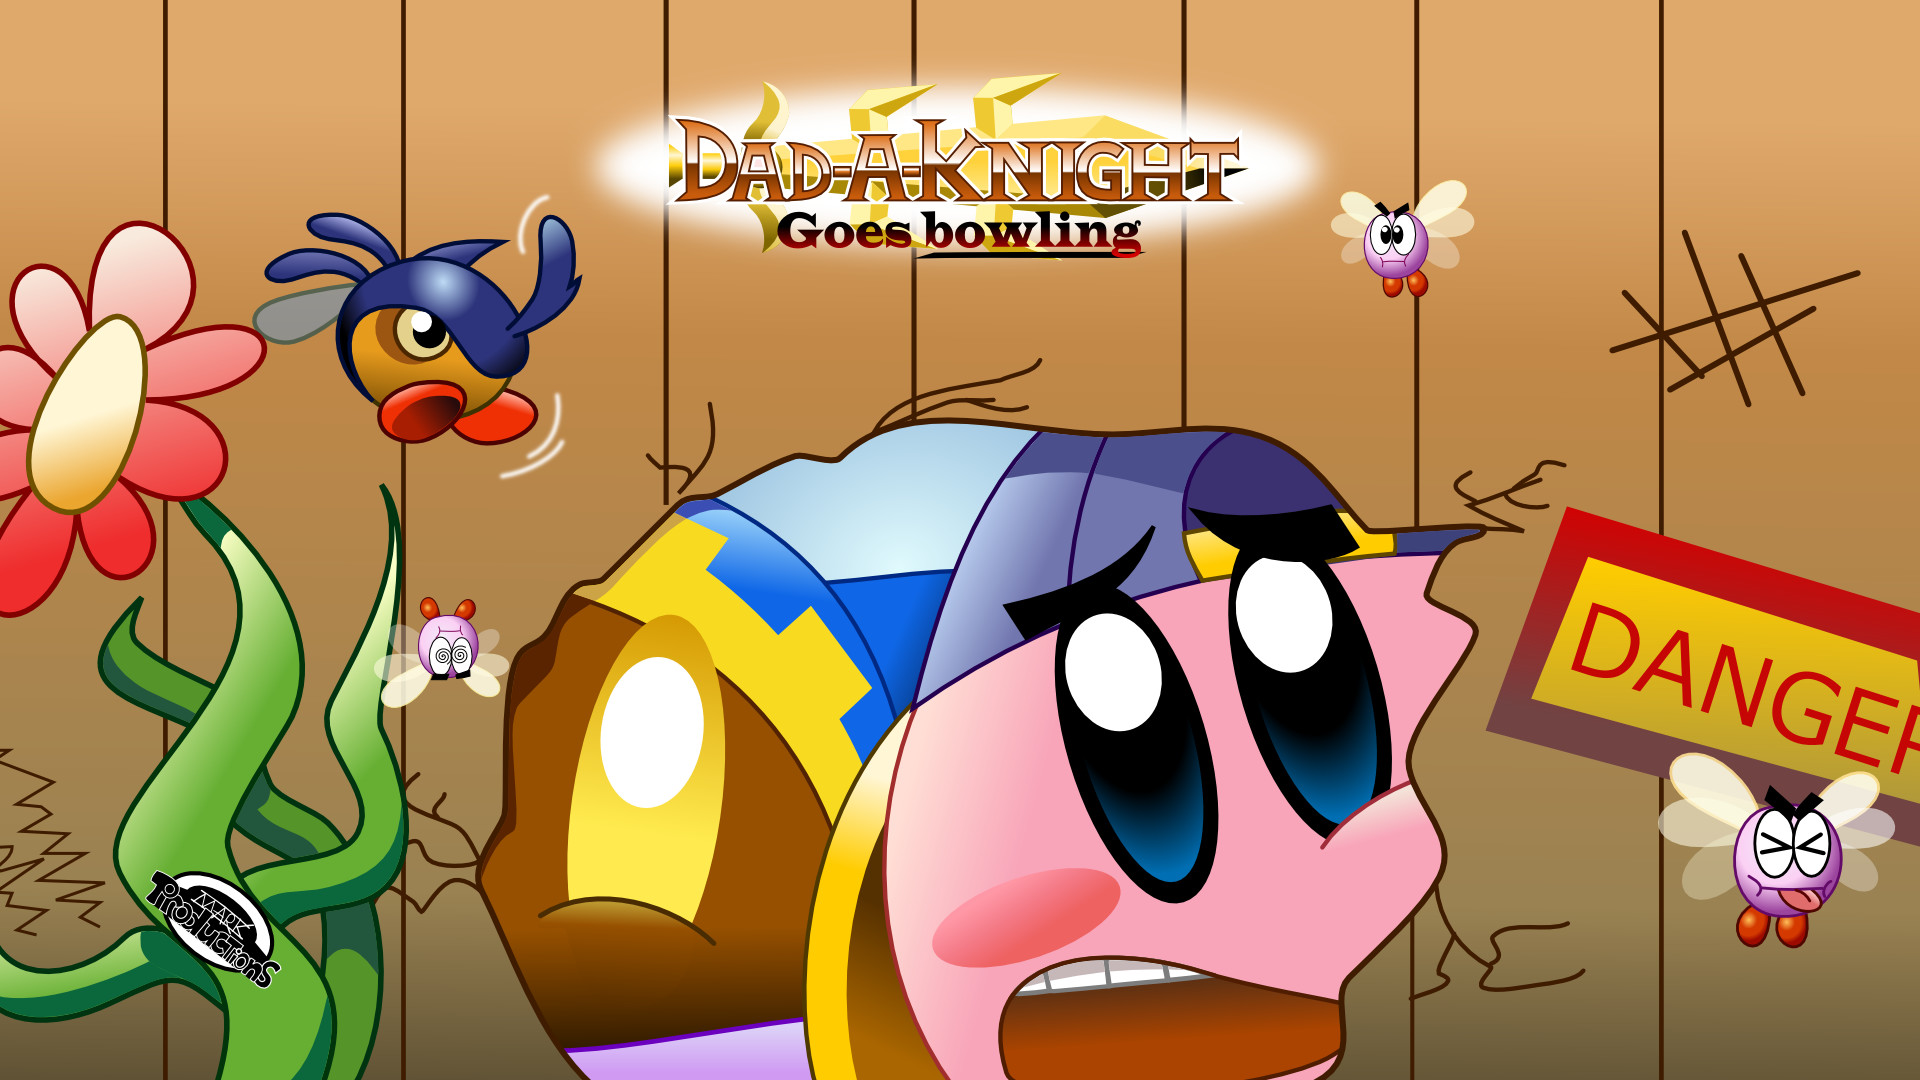 1920x1080 ... Dad-A-Knight Goes Bowling - Wallpaper by MarkProductions